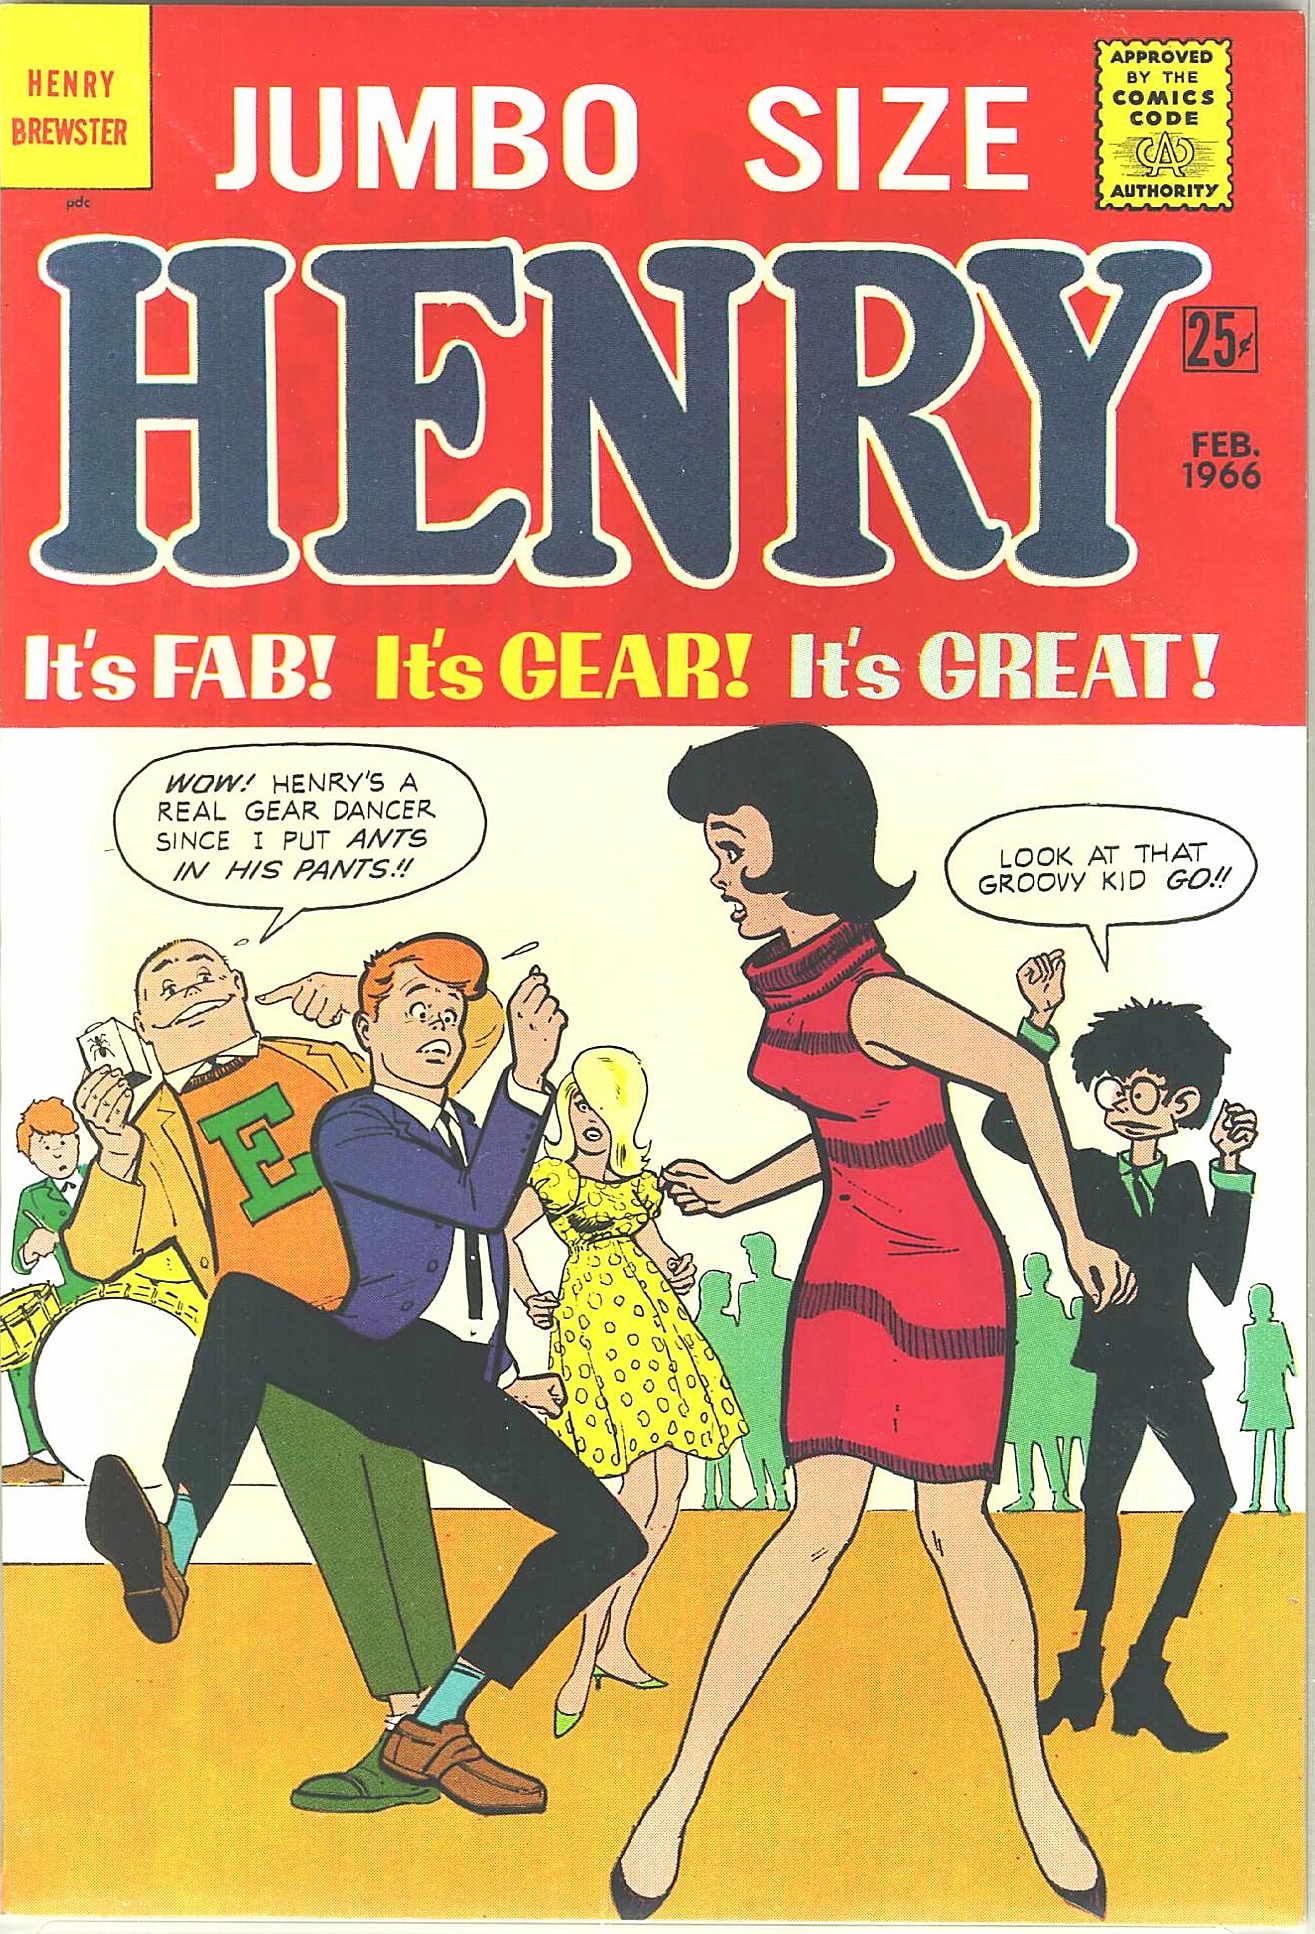 Read online Henry Brewster comic -  Issue #1 - 1